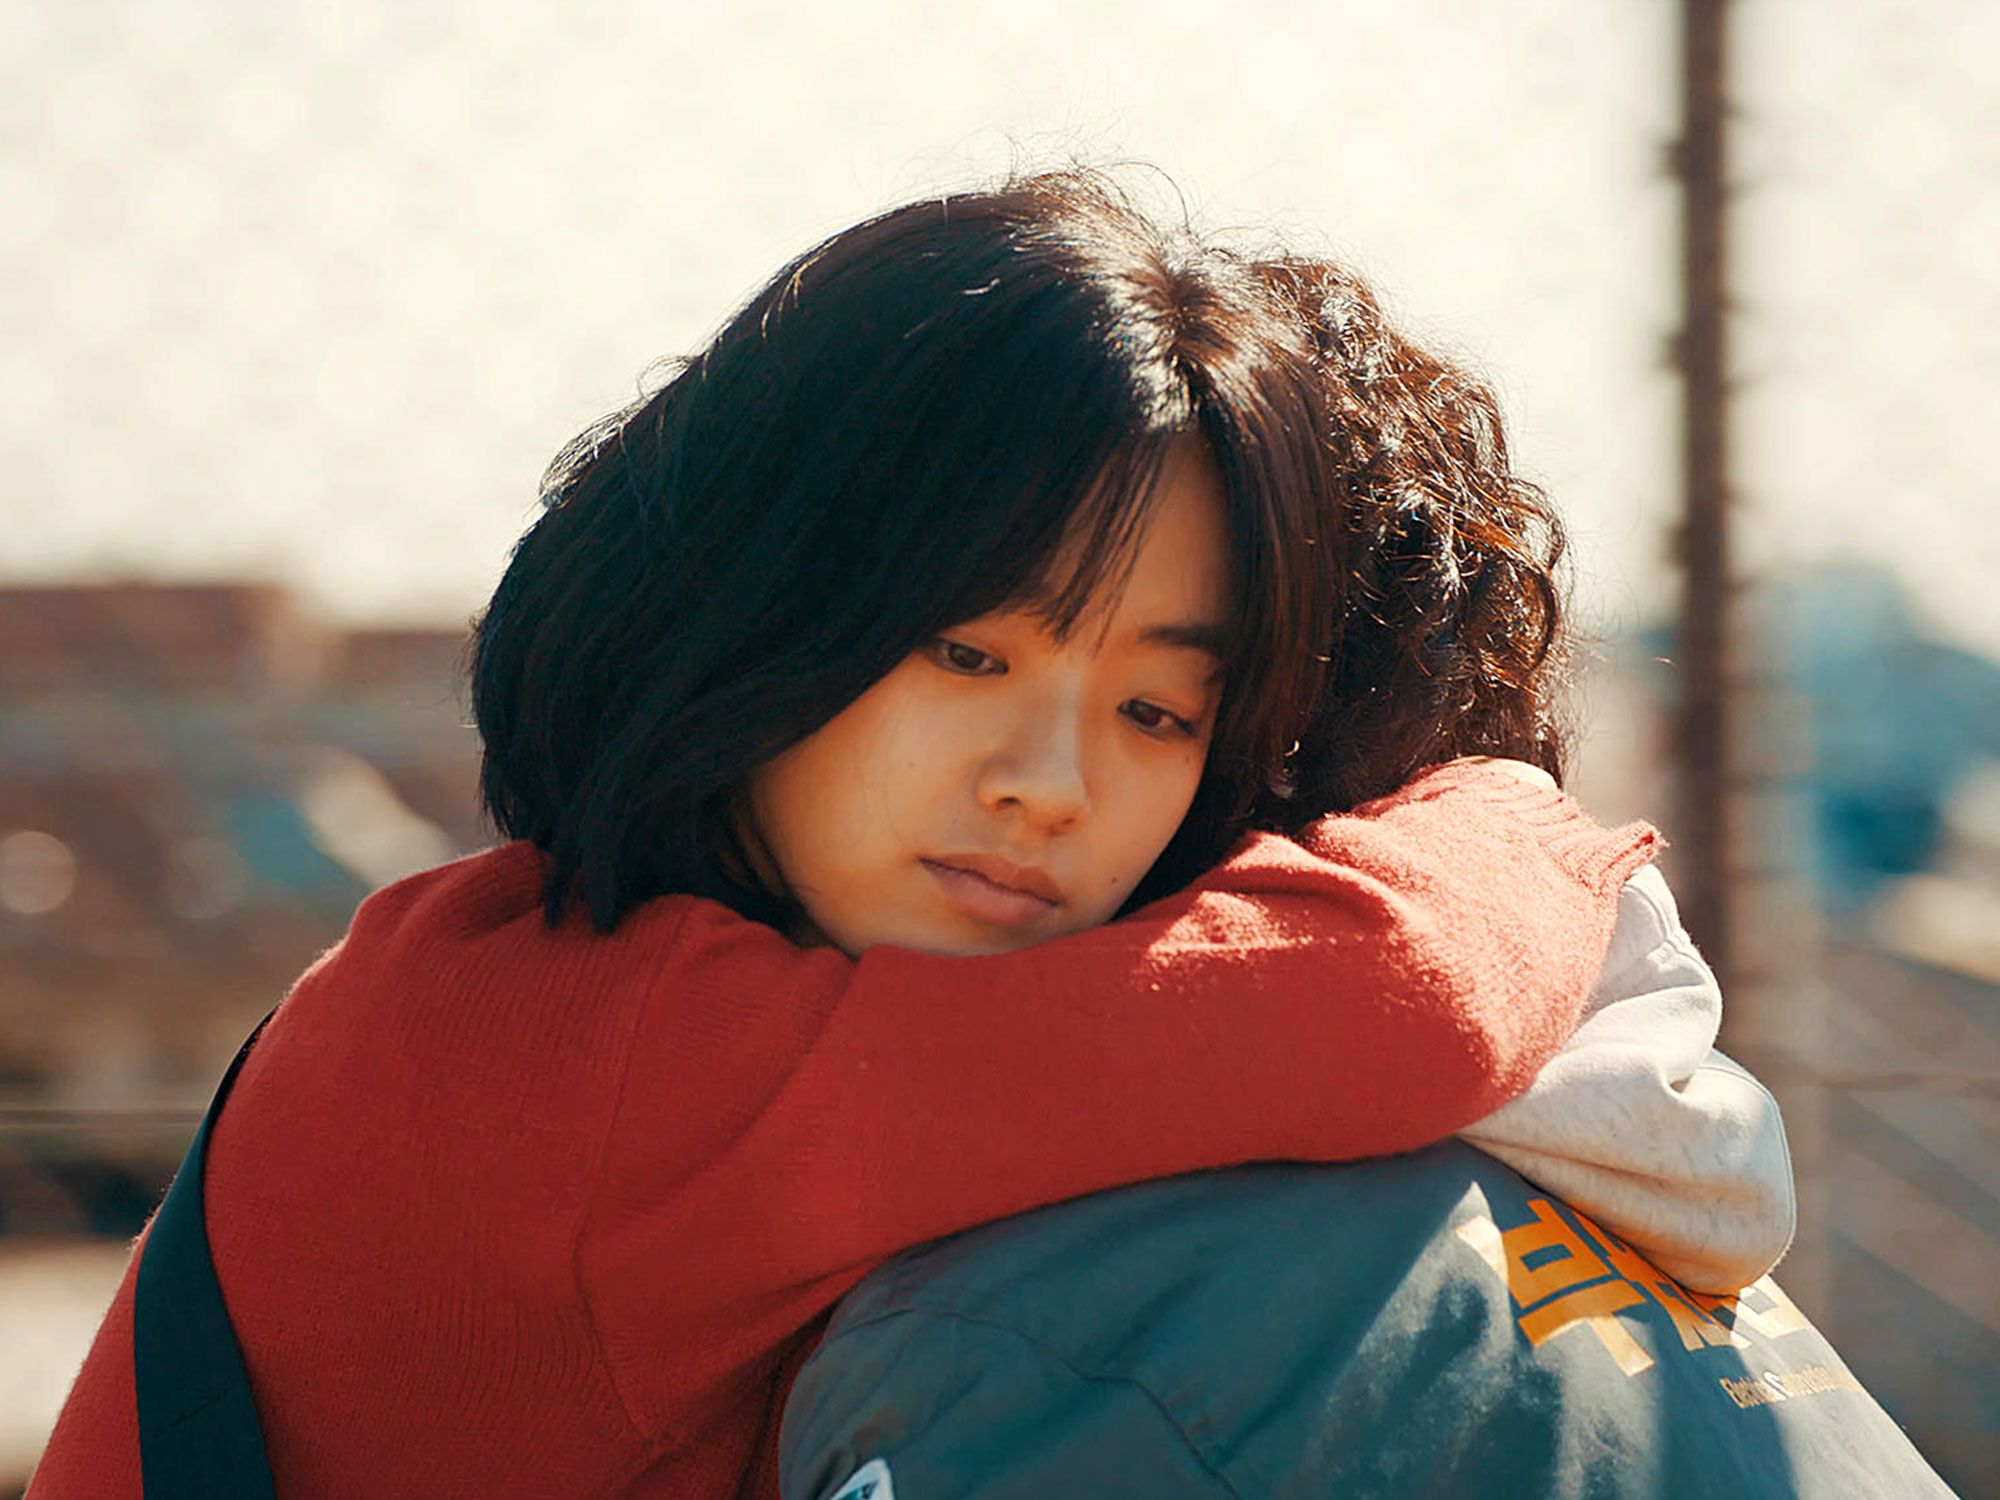 South Koreaâ€™s female filmmakers are finally making their voices heard